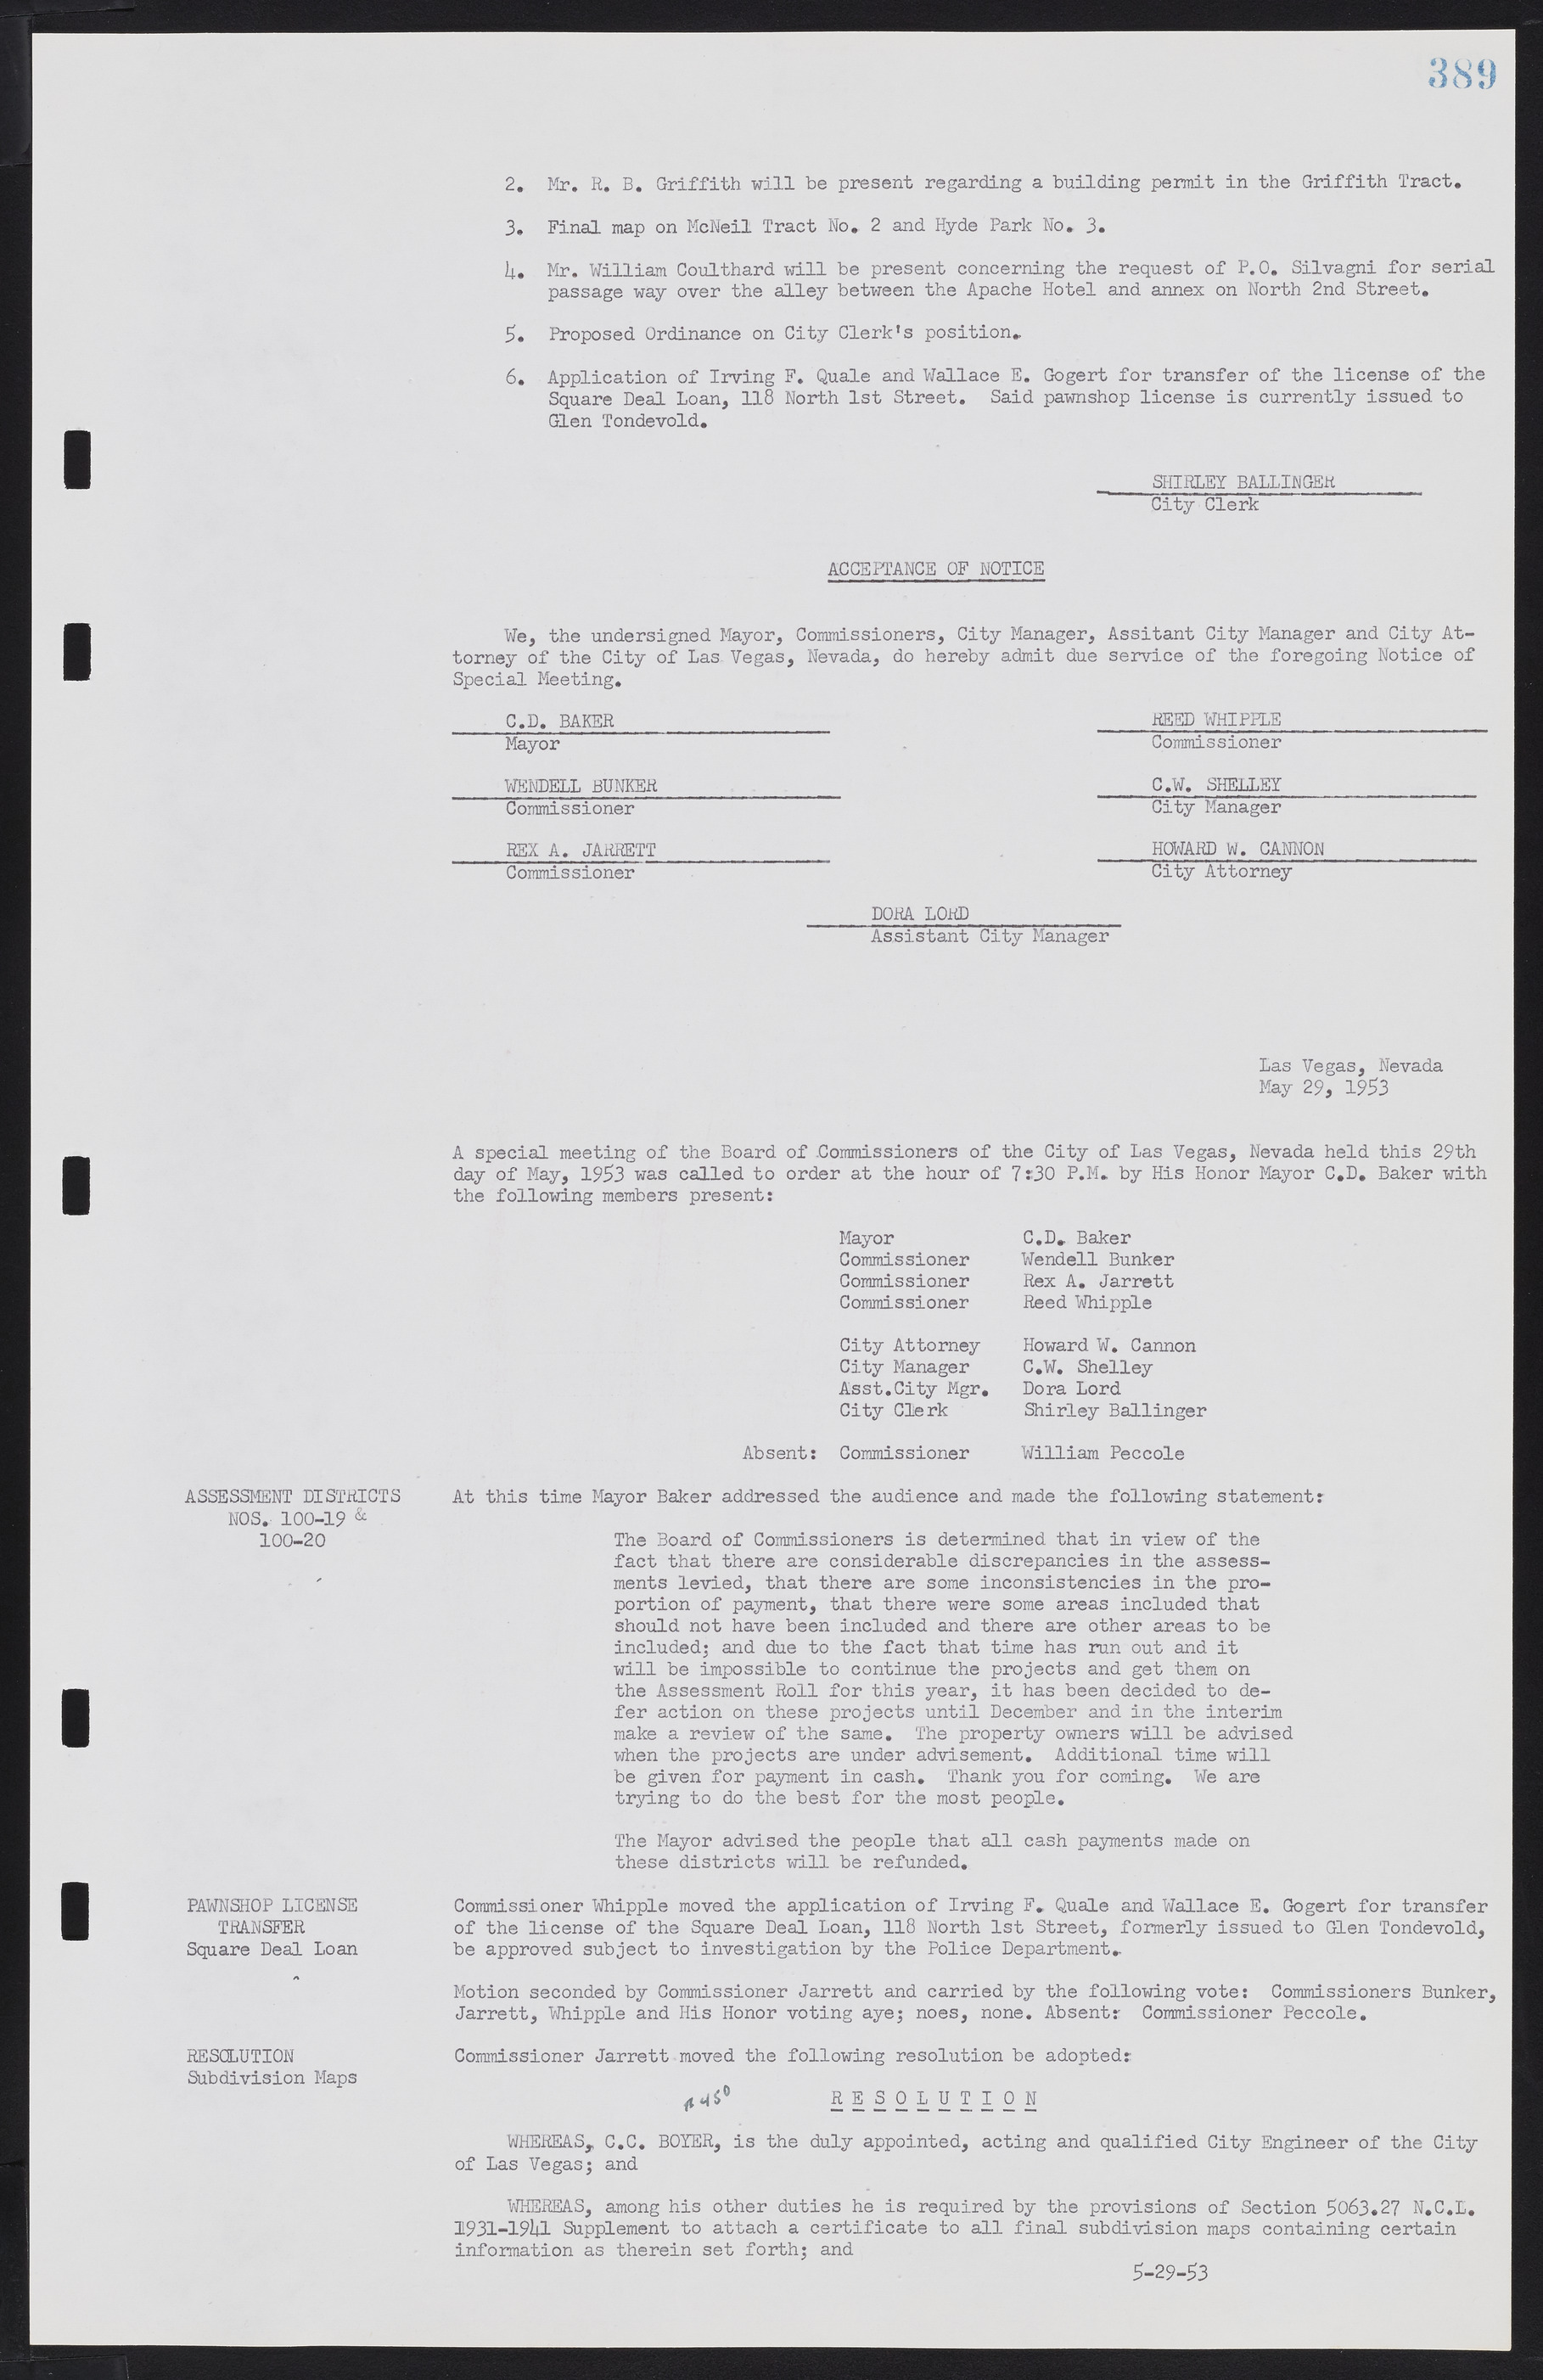 Las Vegas City Commission Minutes, May 26, 1952 to February 17, 1954, lvc000008-417